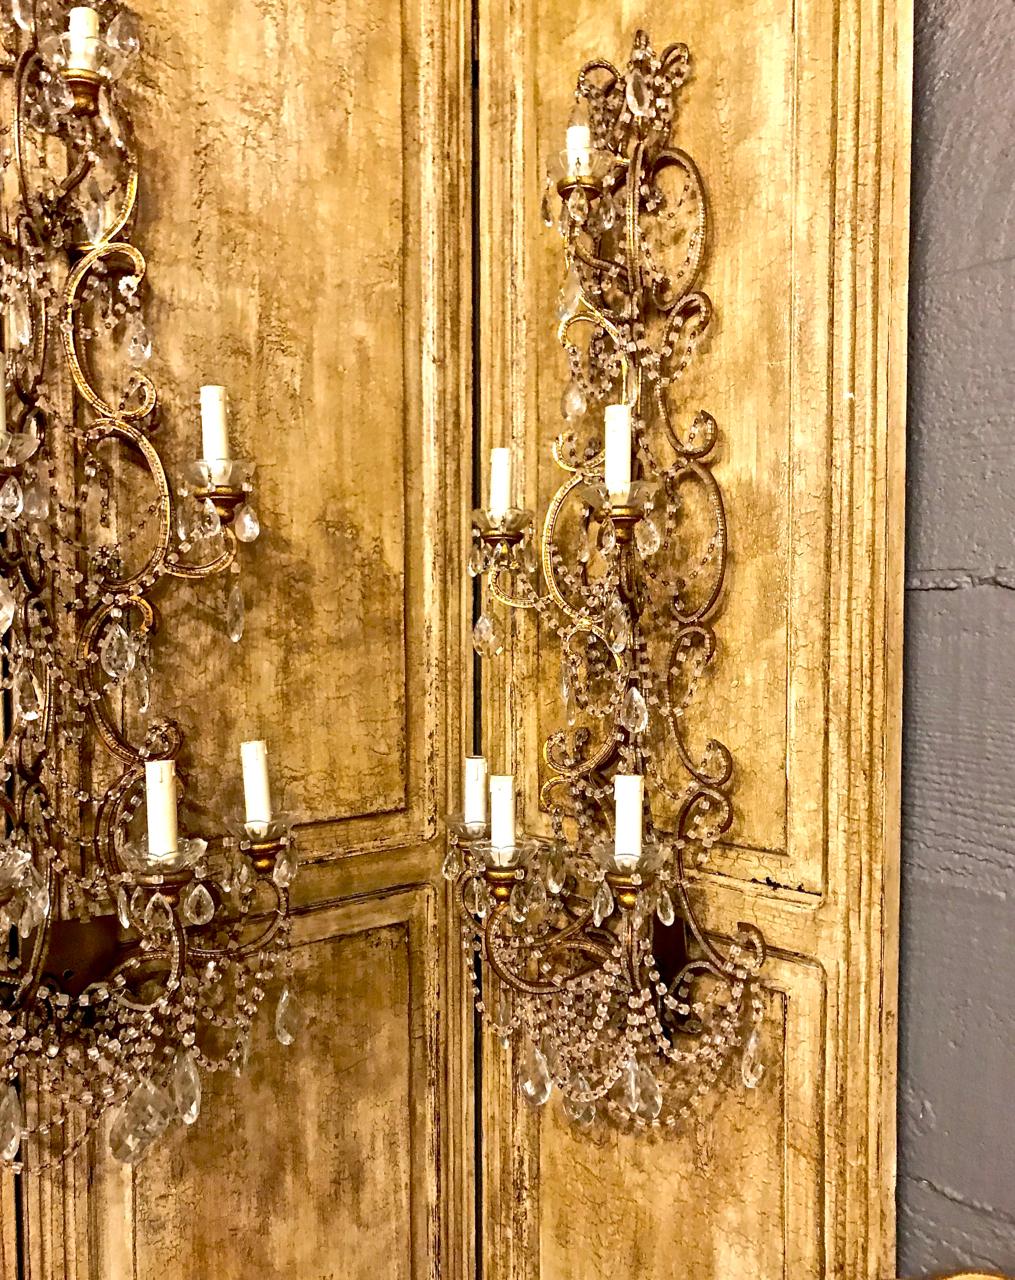 This is a superb pair of very large mid-20th century. Italian beaded sconces. The stunning sconces feature row upon row of 